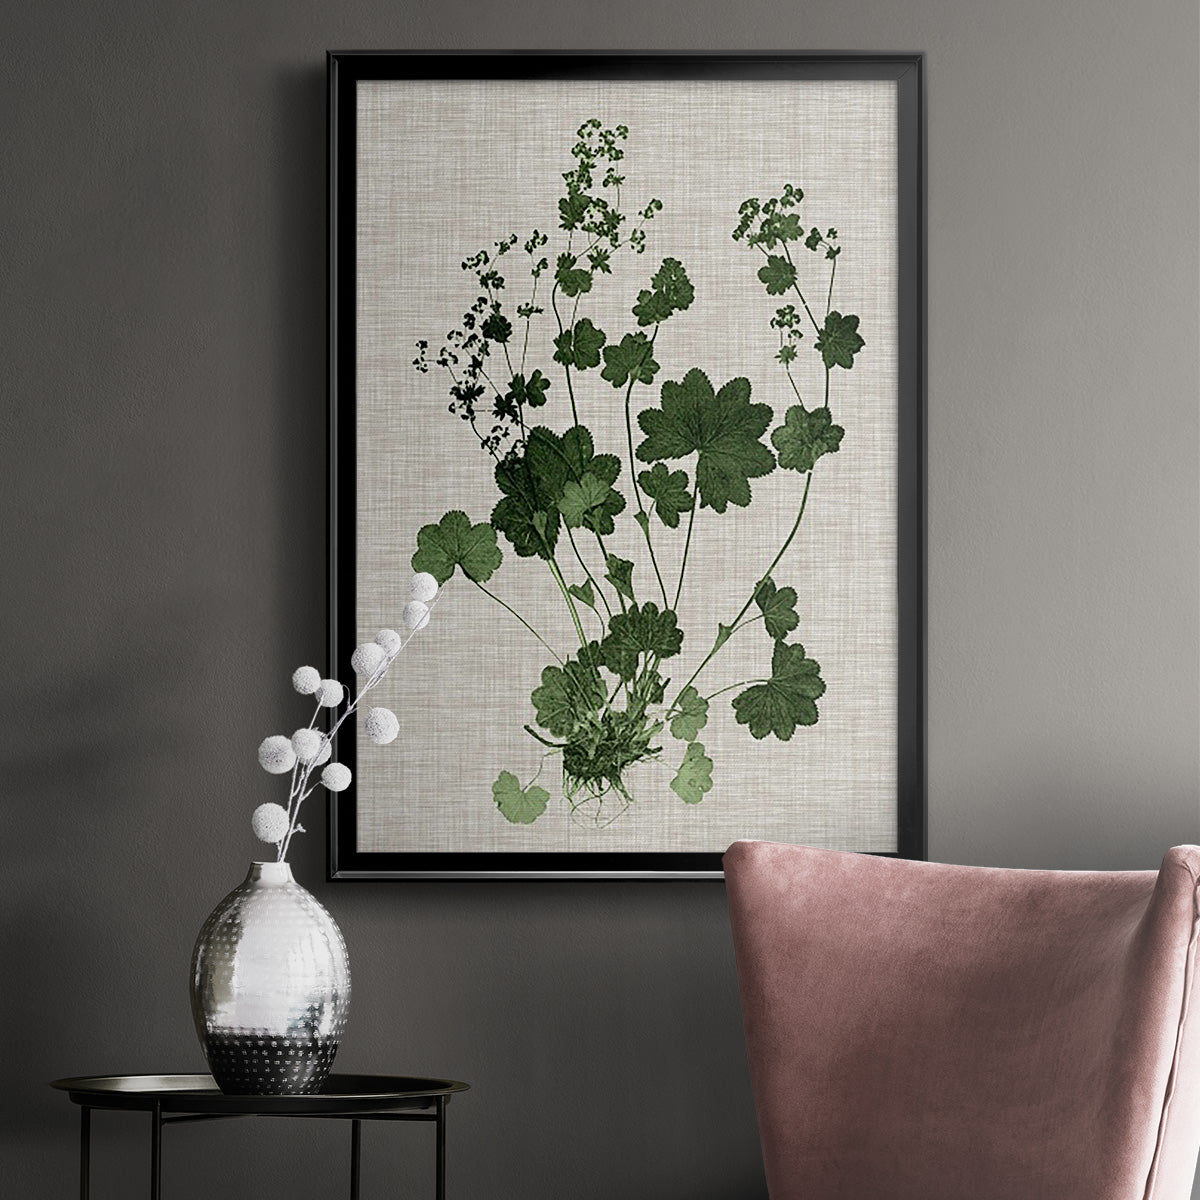 Forest Foliage on Linen III Premium Framed Print - Ready to Hang